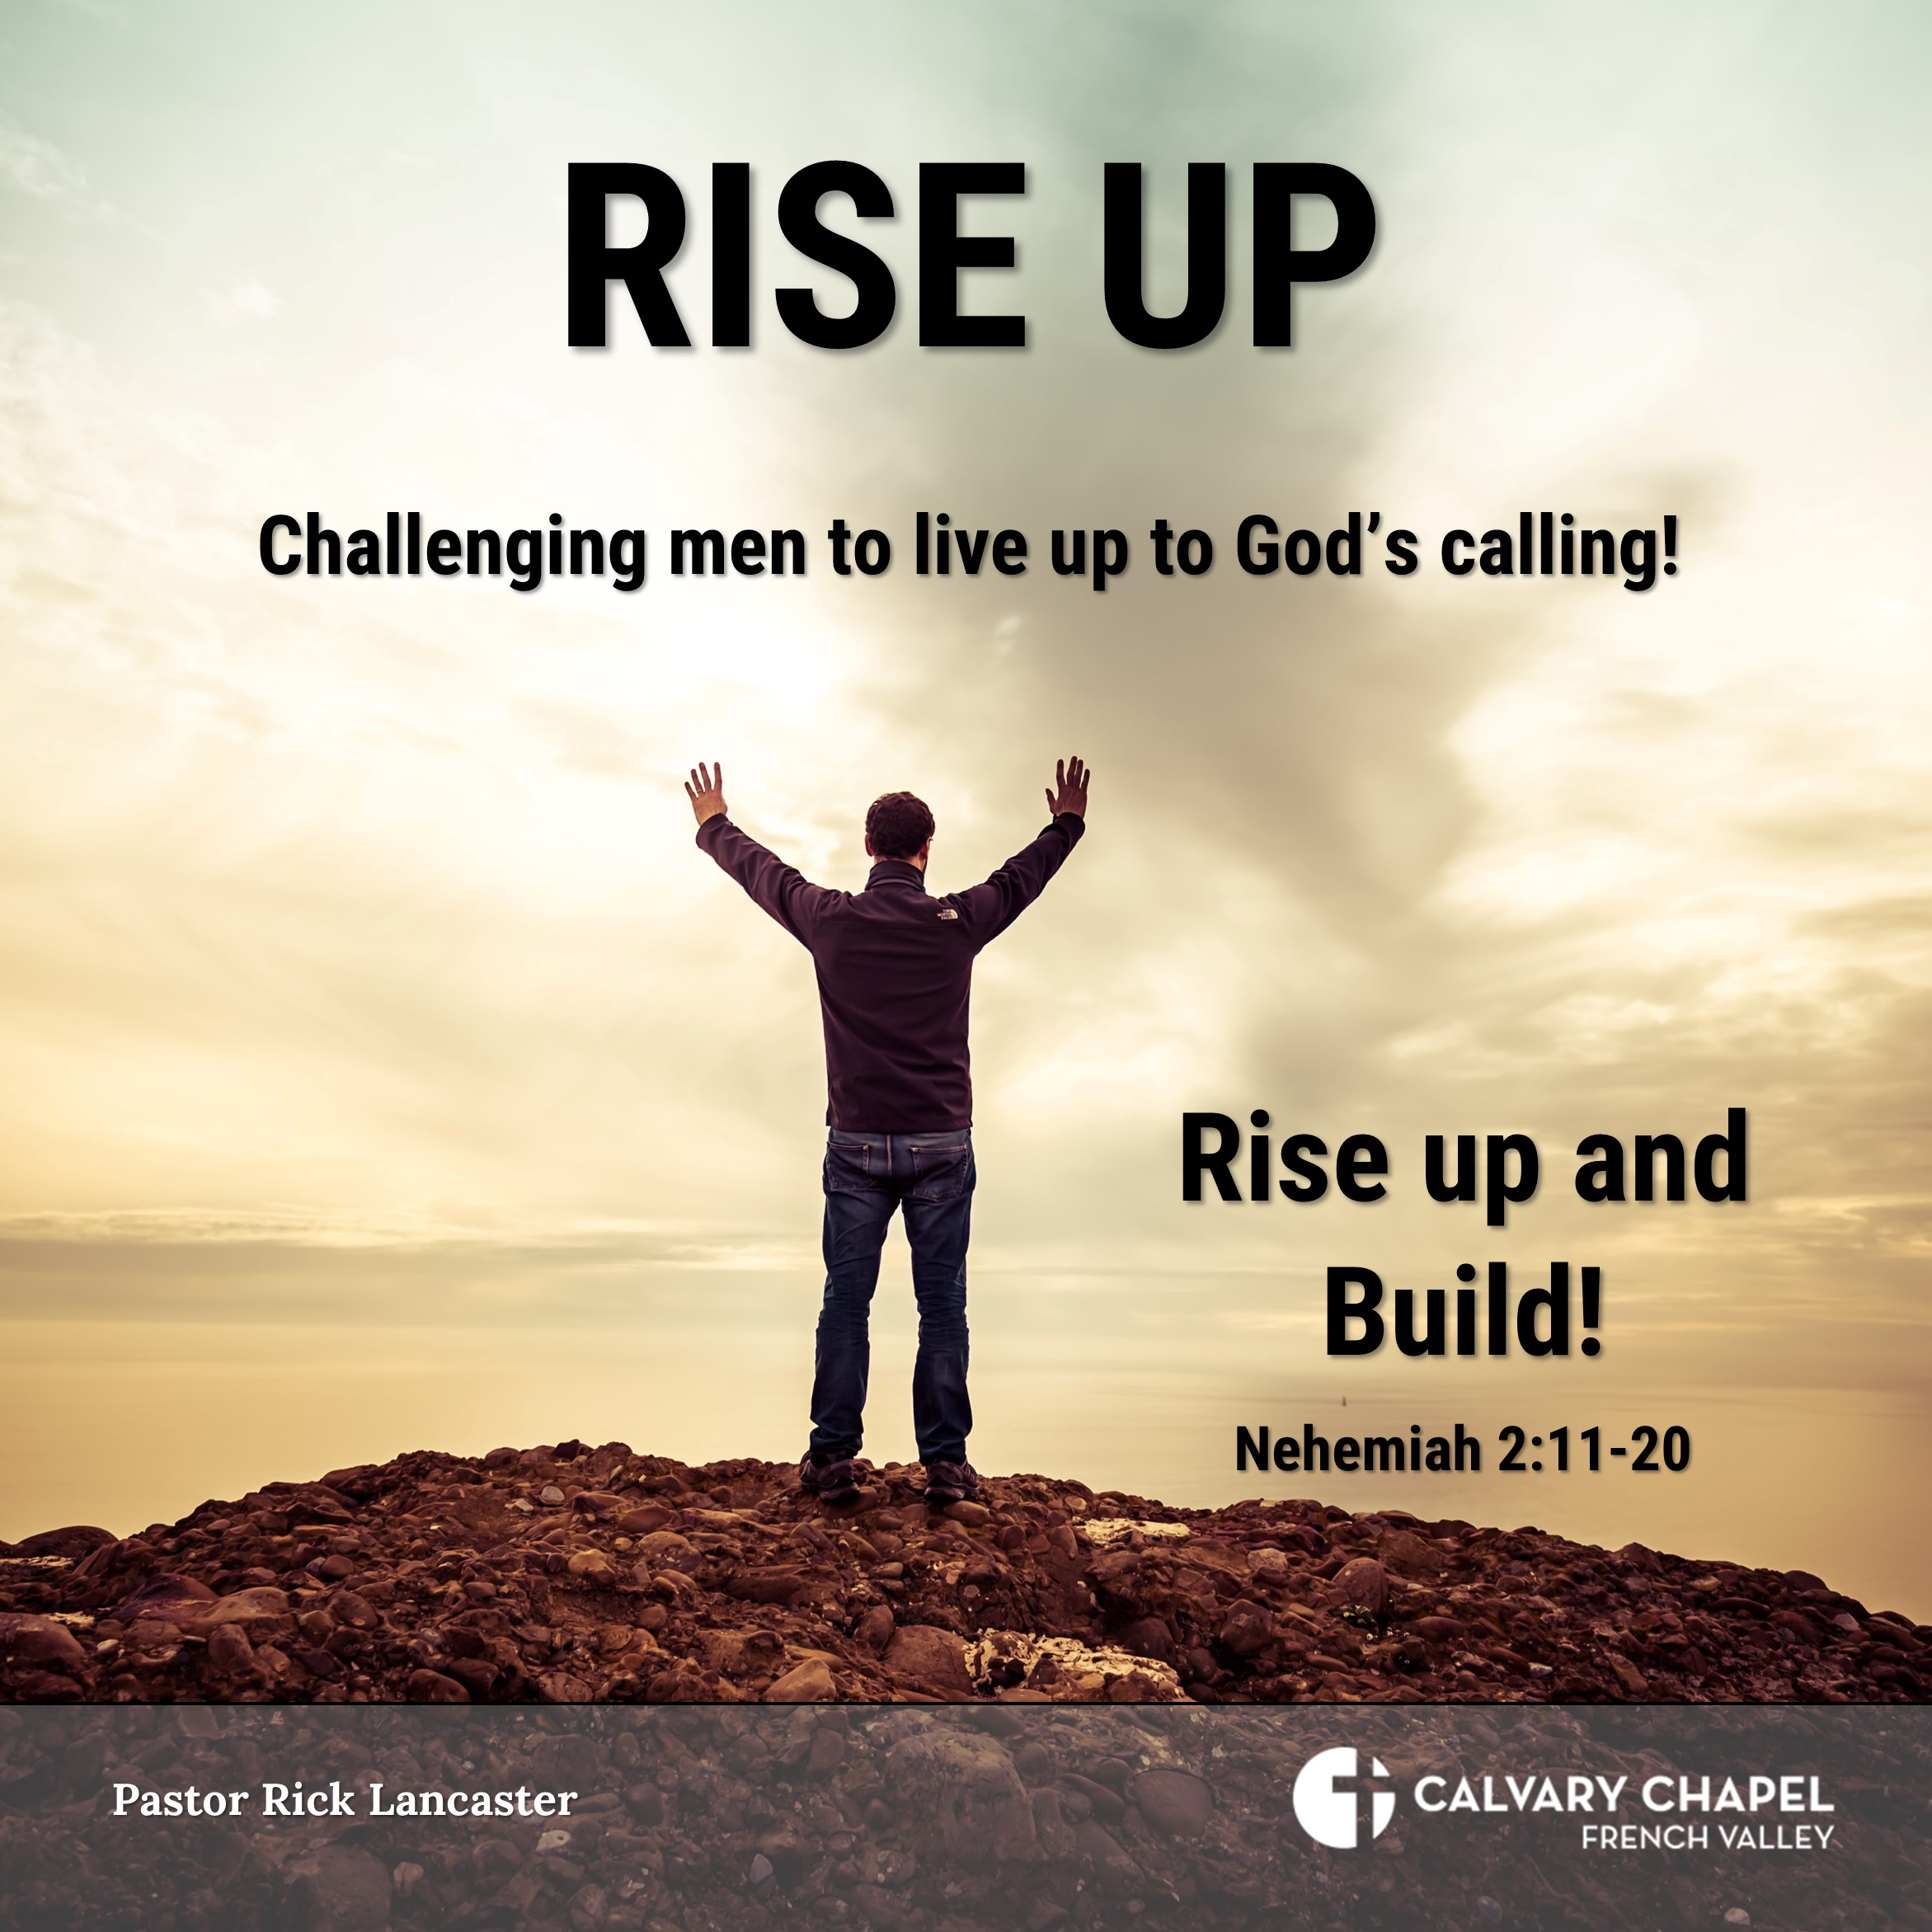 Rise up and build! Nehemiah 2:11-20 - Men’s Breakfast  - September 16, 2023 - RISE UP: Challenging men to live up to God’s calling!